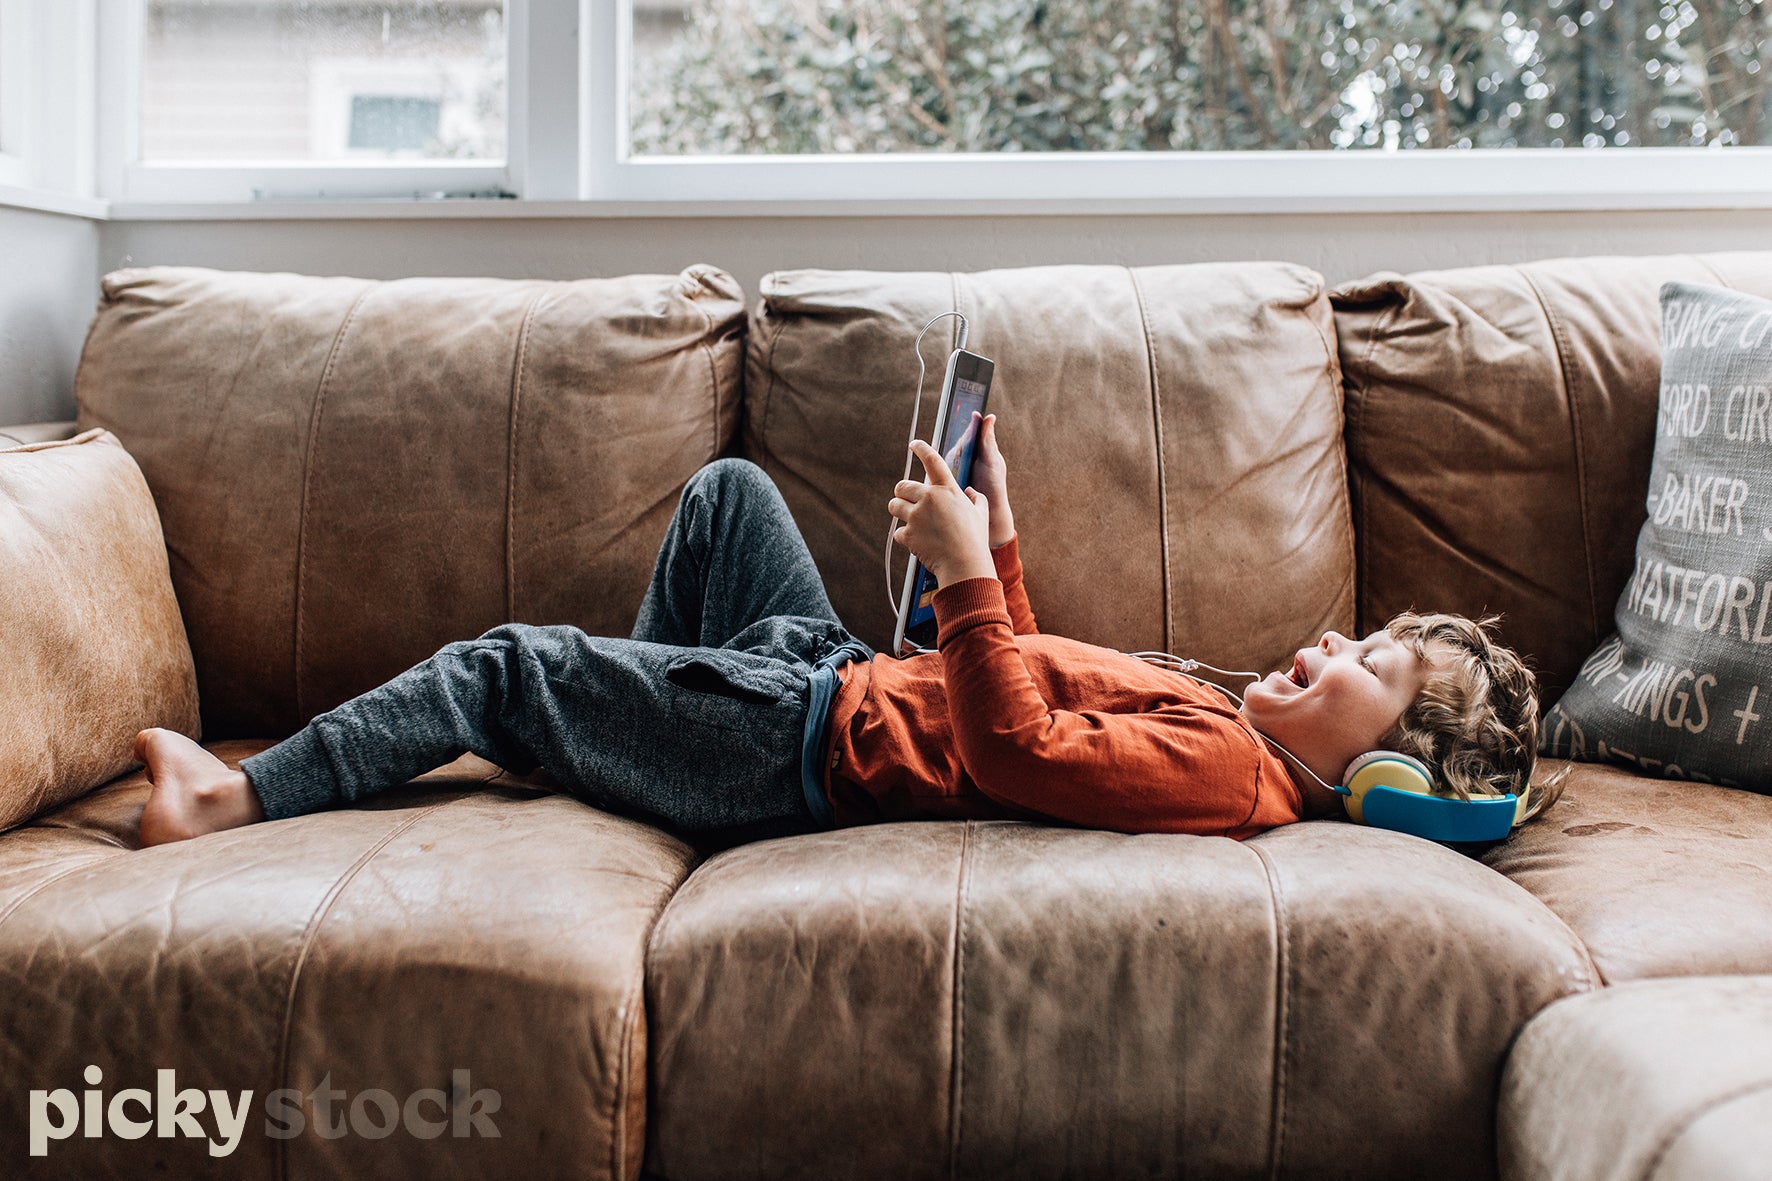 Small boy lying on his back looking at tablet / ipad wearing blue and yellow headphones. Lying on a brown leather couch. Window to the outside at the back of the image. Kid is wearing a orange long sleeve top and blue jeans with bear feet.